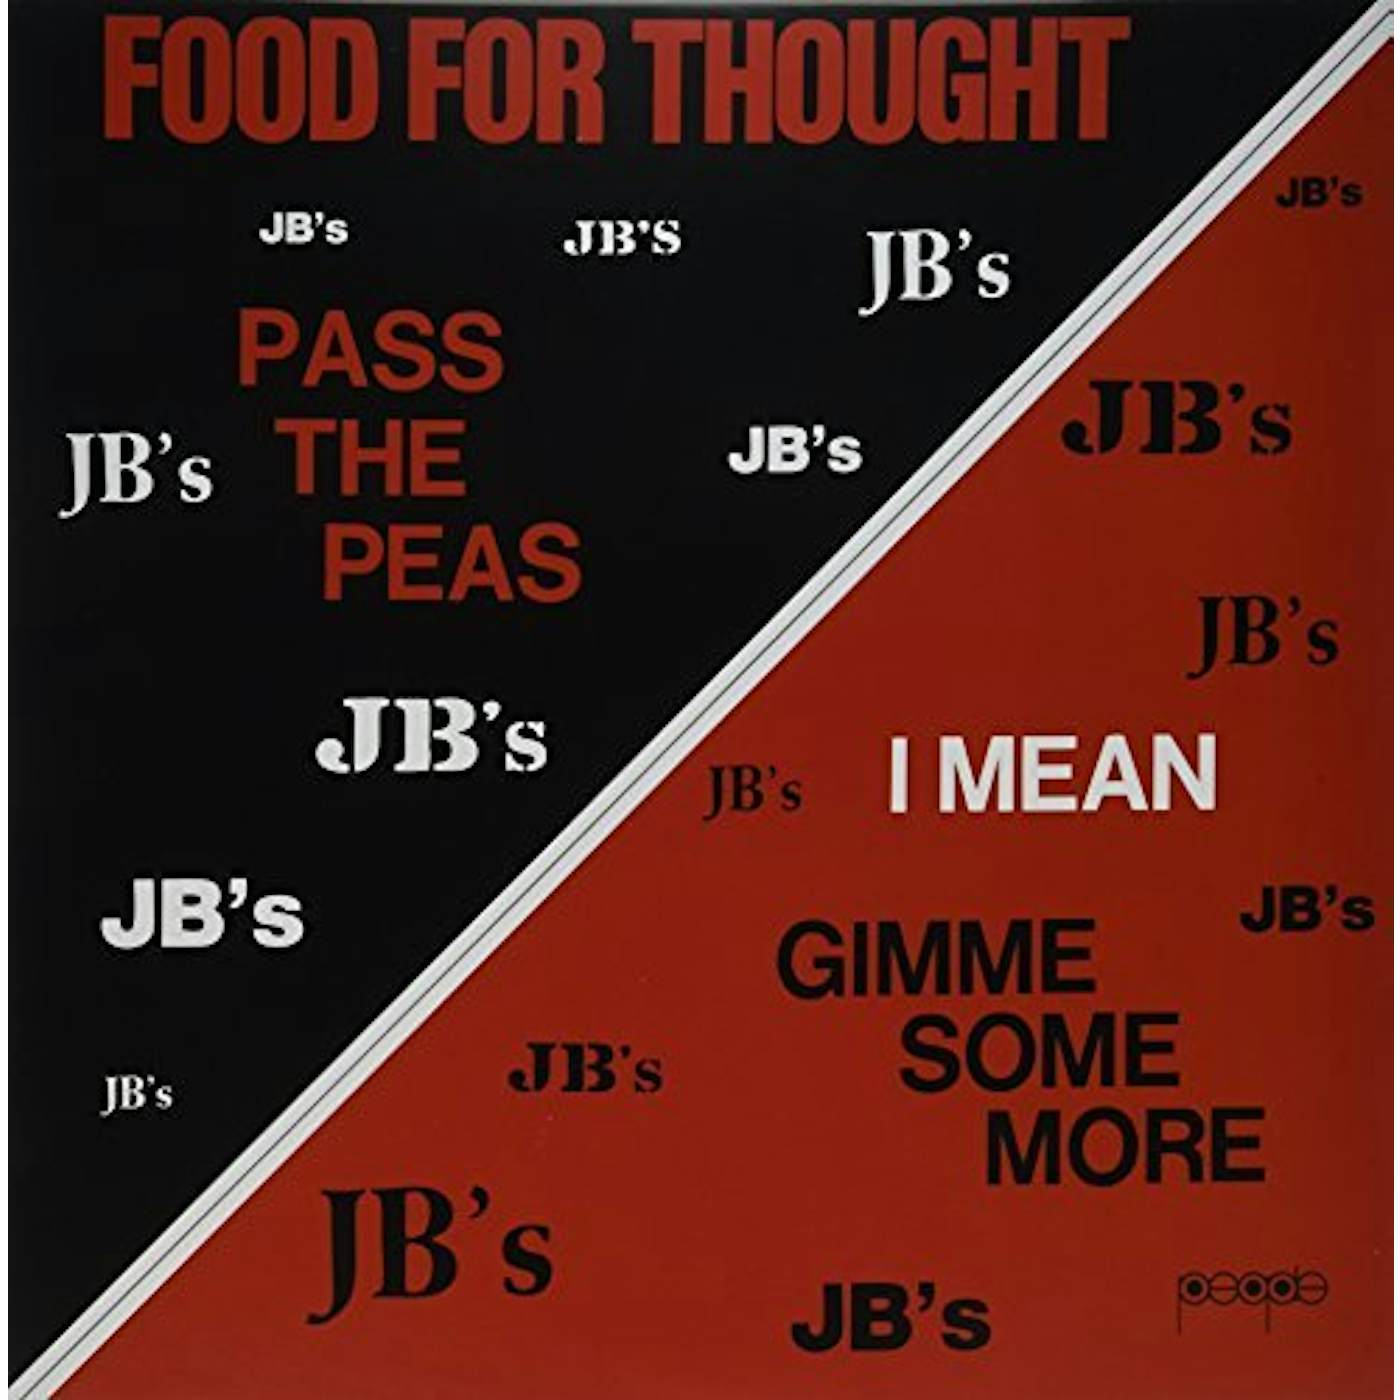 The J.B.'s FOOD FOR THOUGHT: GET ON DOWN EDITION Vinyl Record